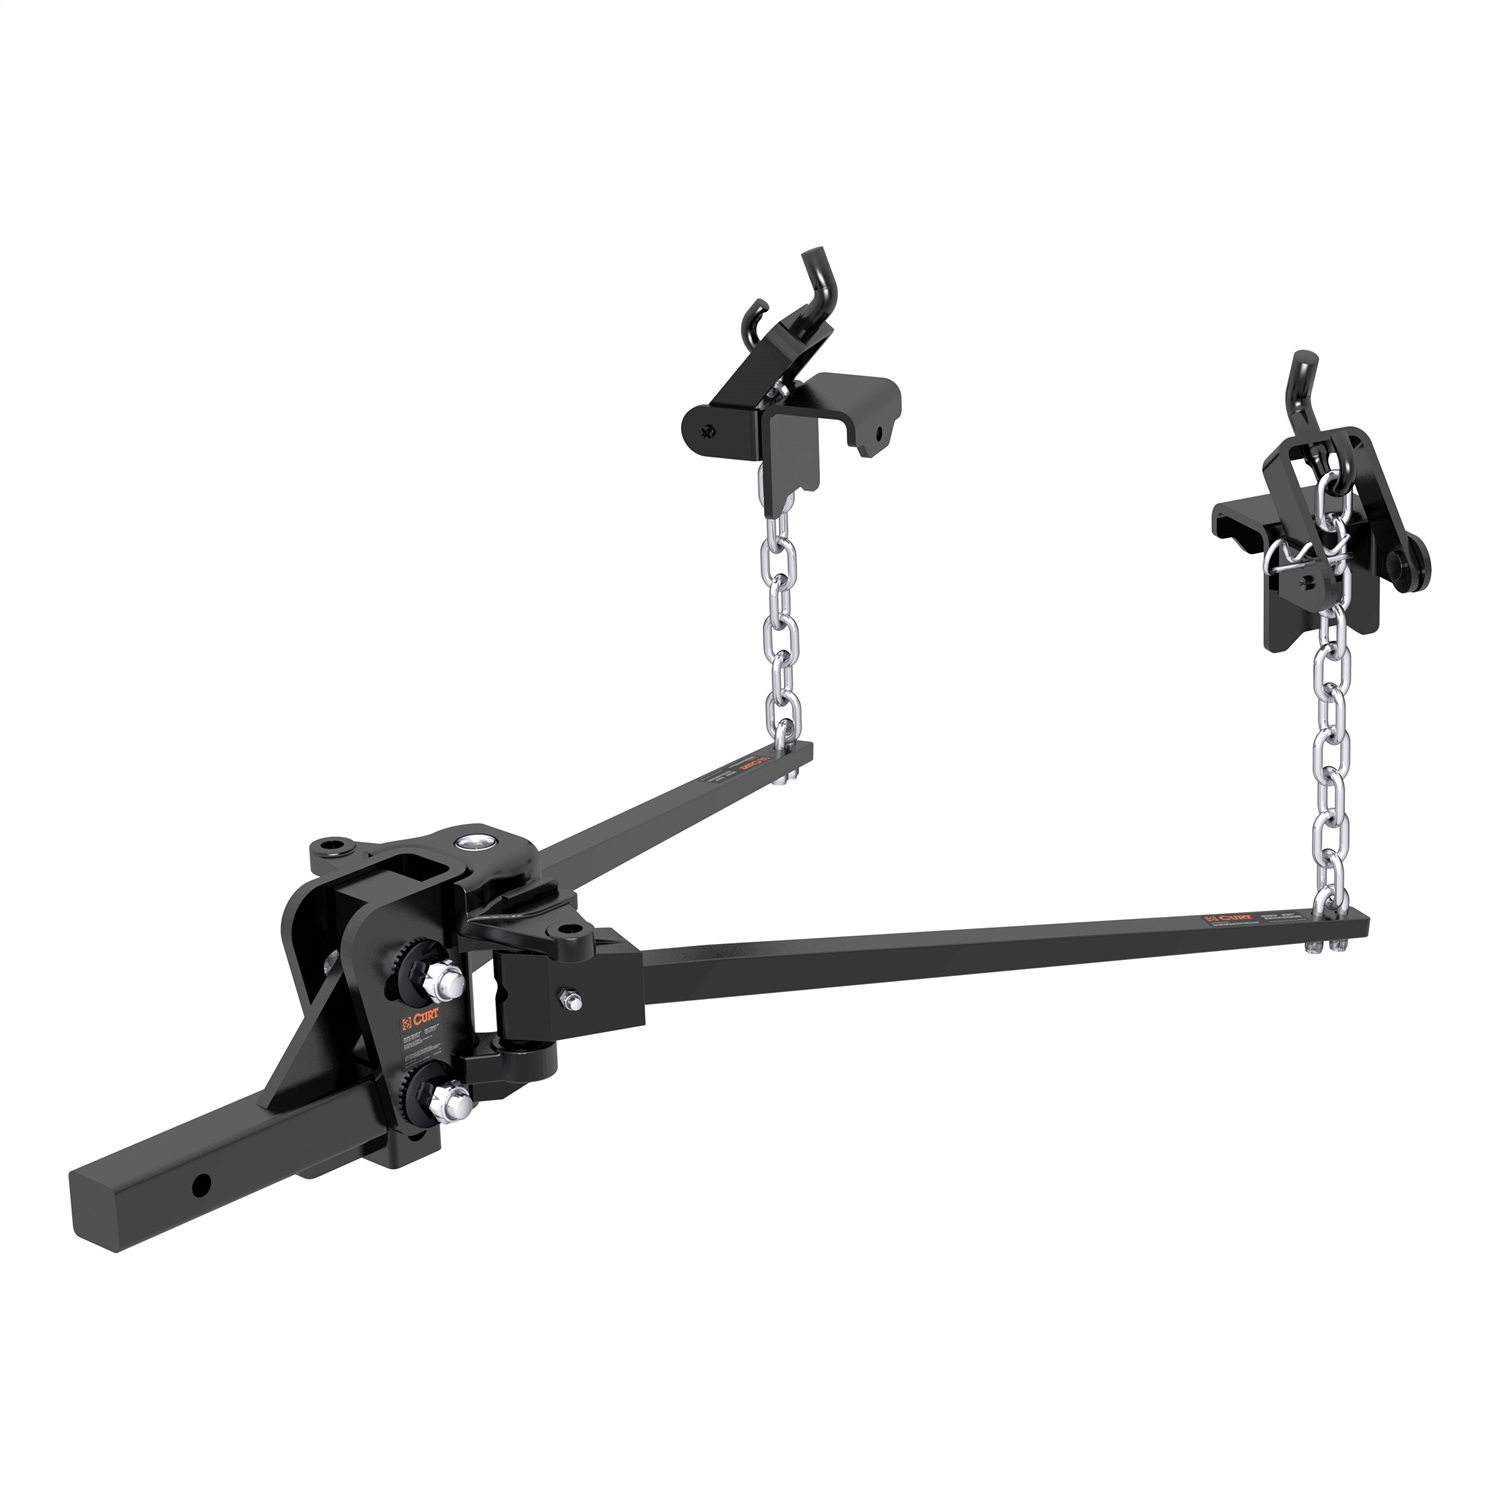 CURT Manufacturing CURT Manufacturing 17300 Weight Distributing Hitch; Trunion Bar  Fits